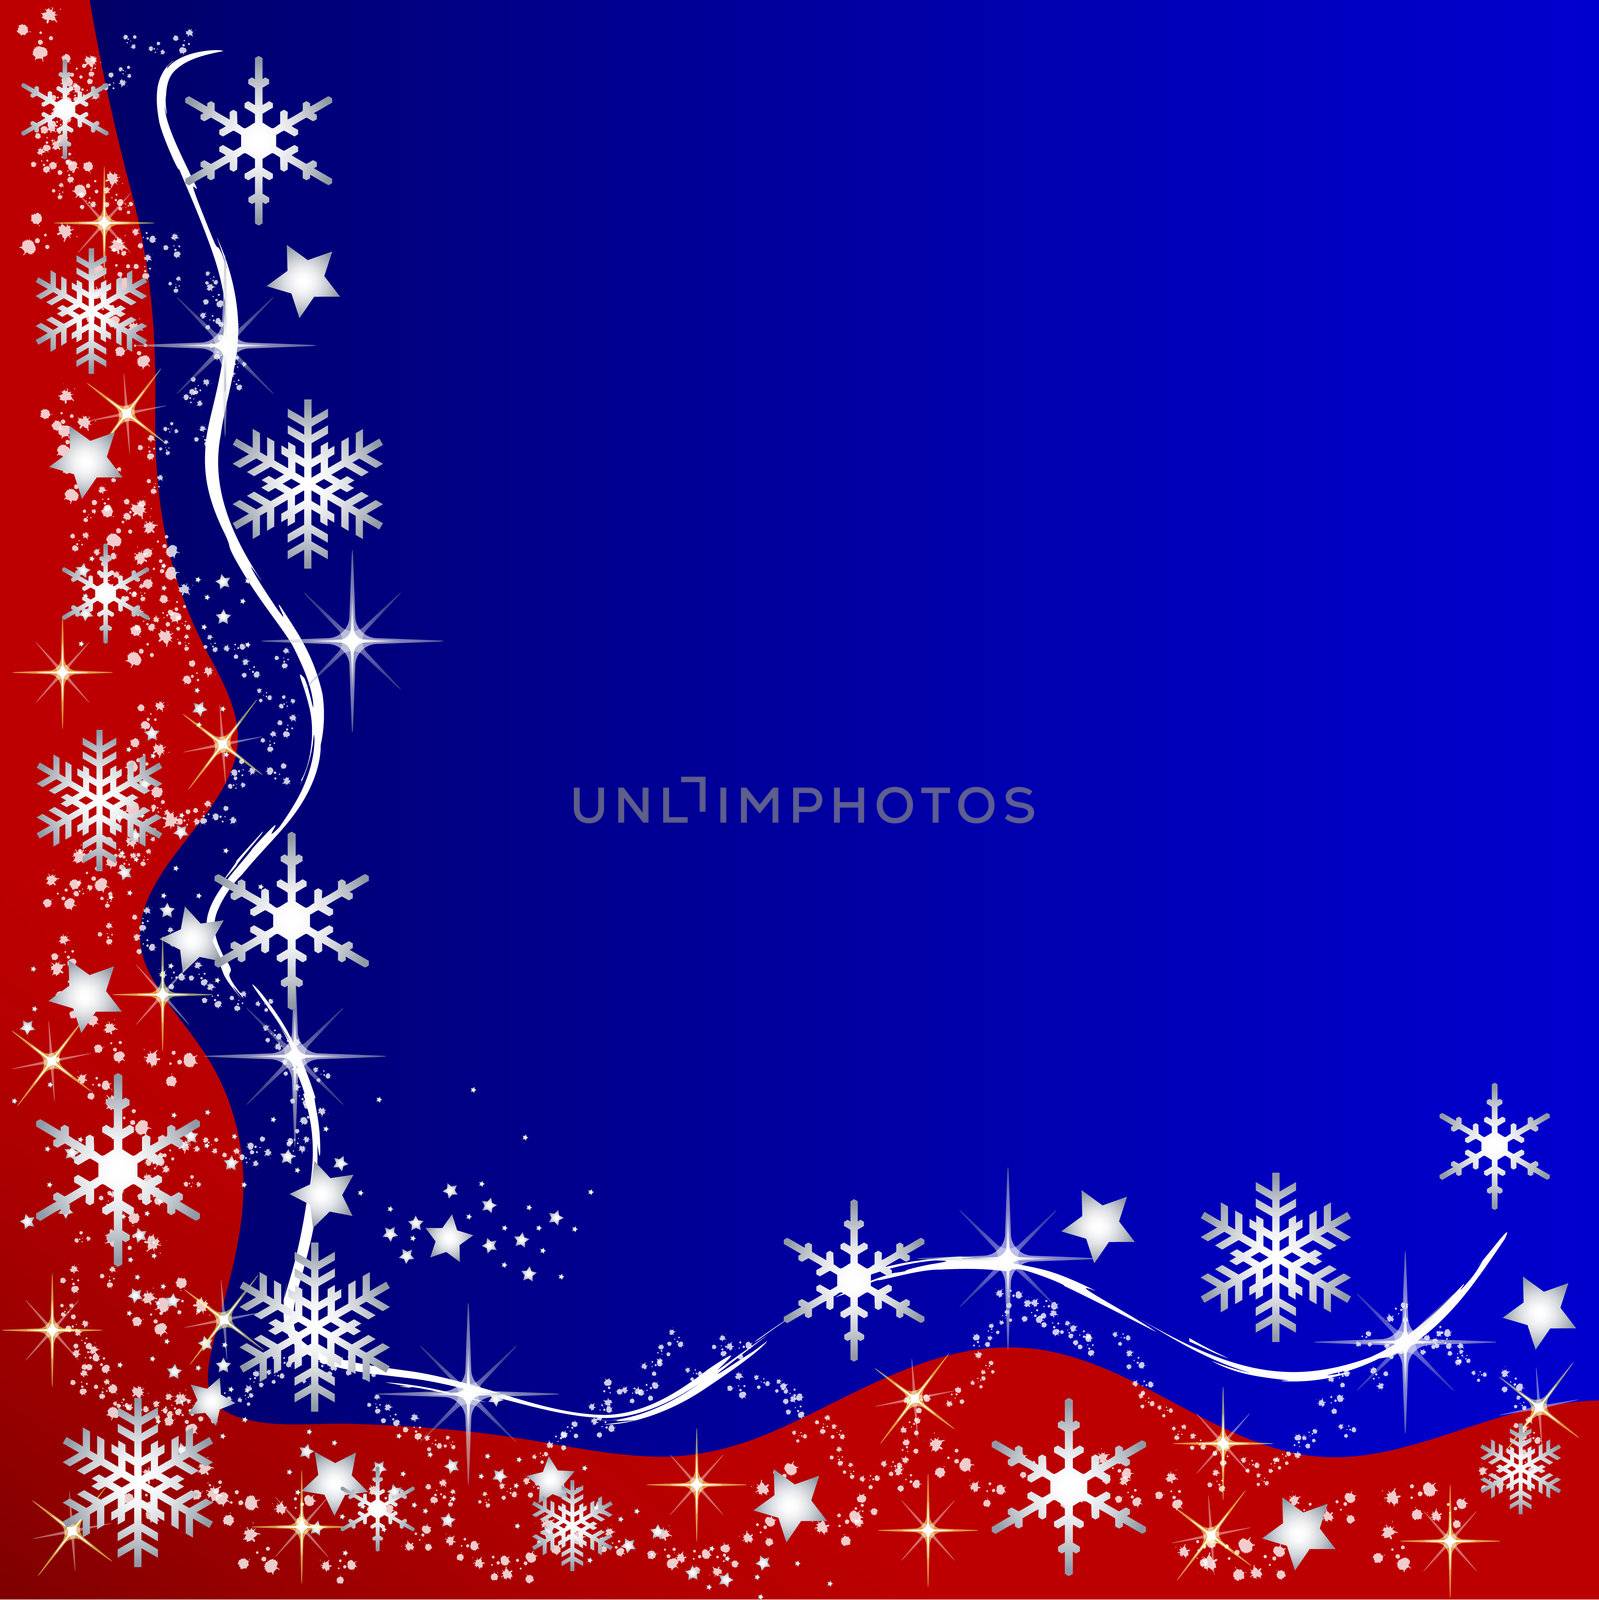 Illustration of a christmas frame background by peromarketing